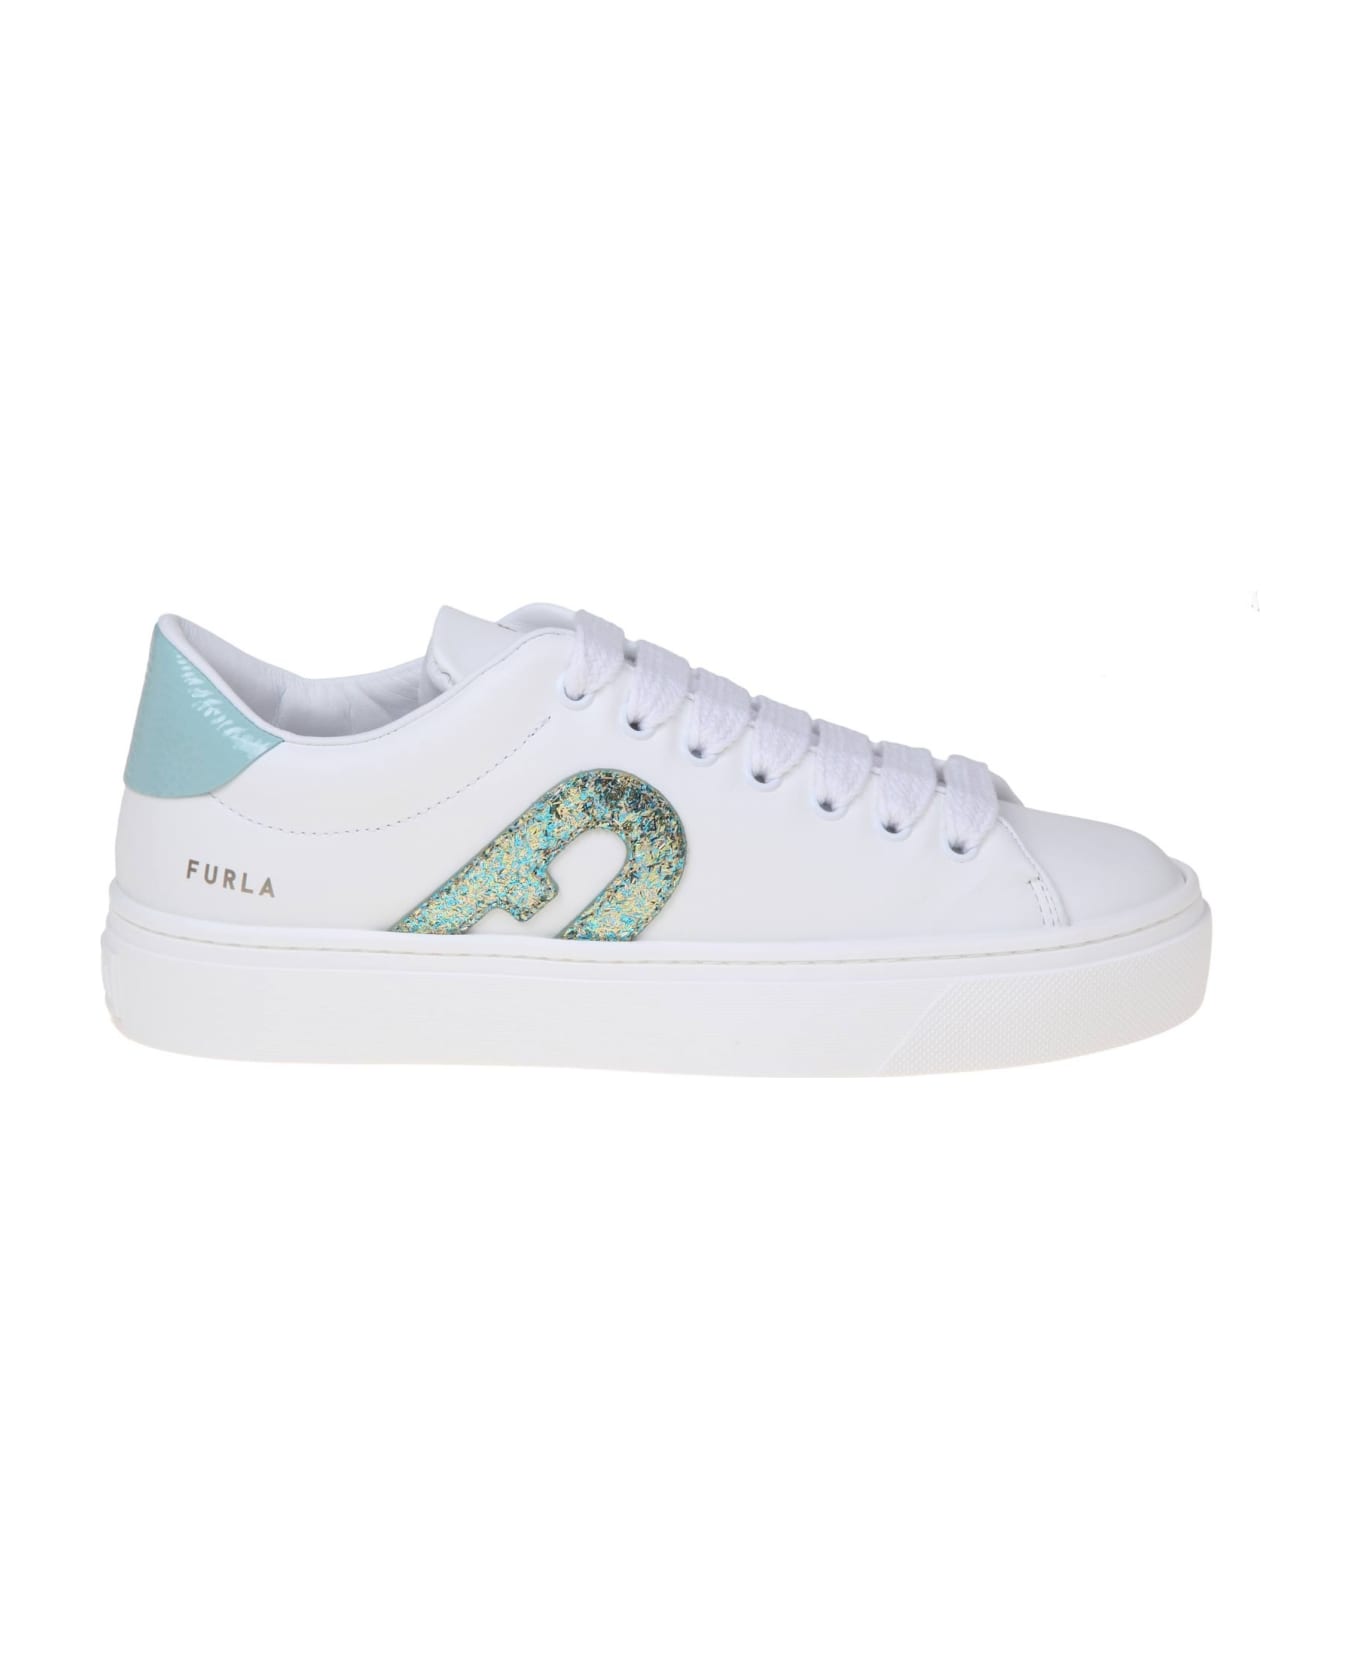 Furla Joy Lace Up Sneakers In White Leather - Green